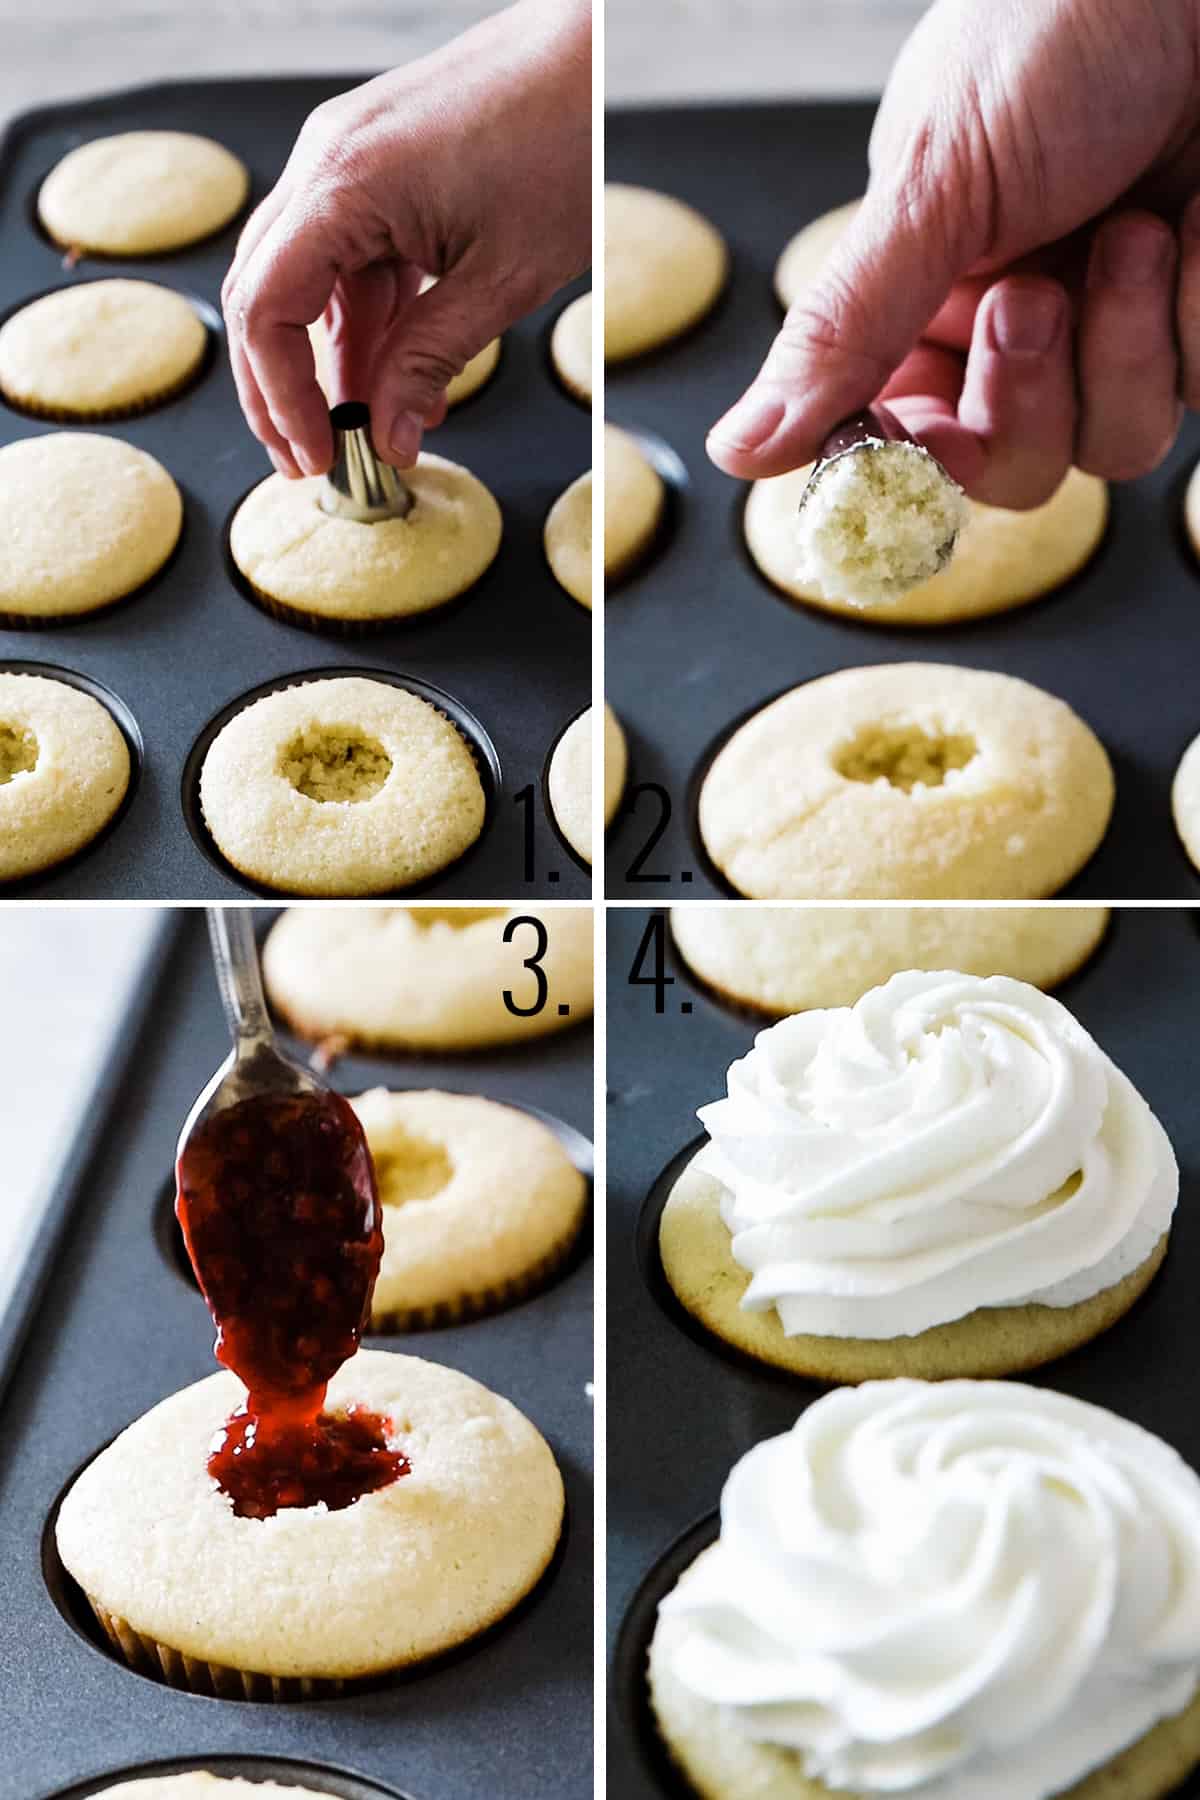 How to assemble the cupcakes.